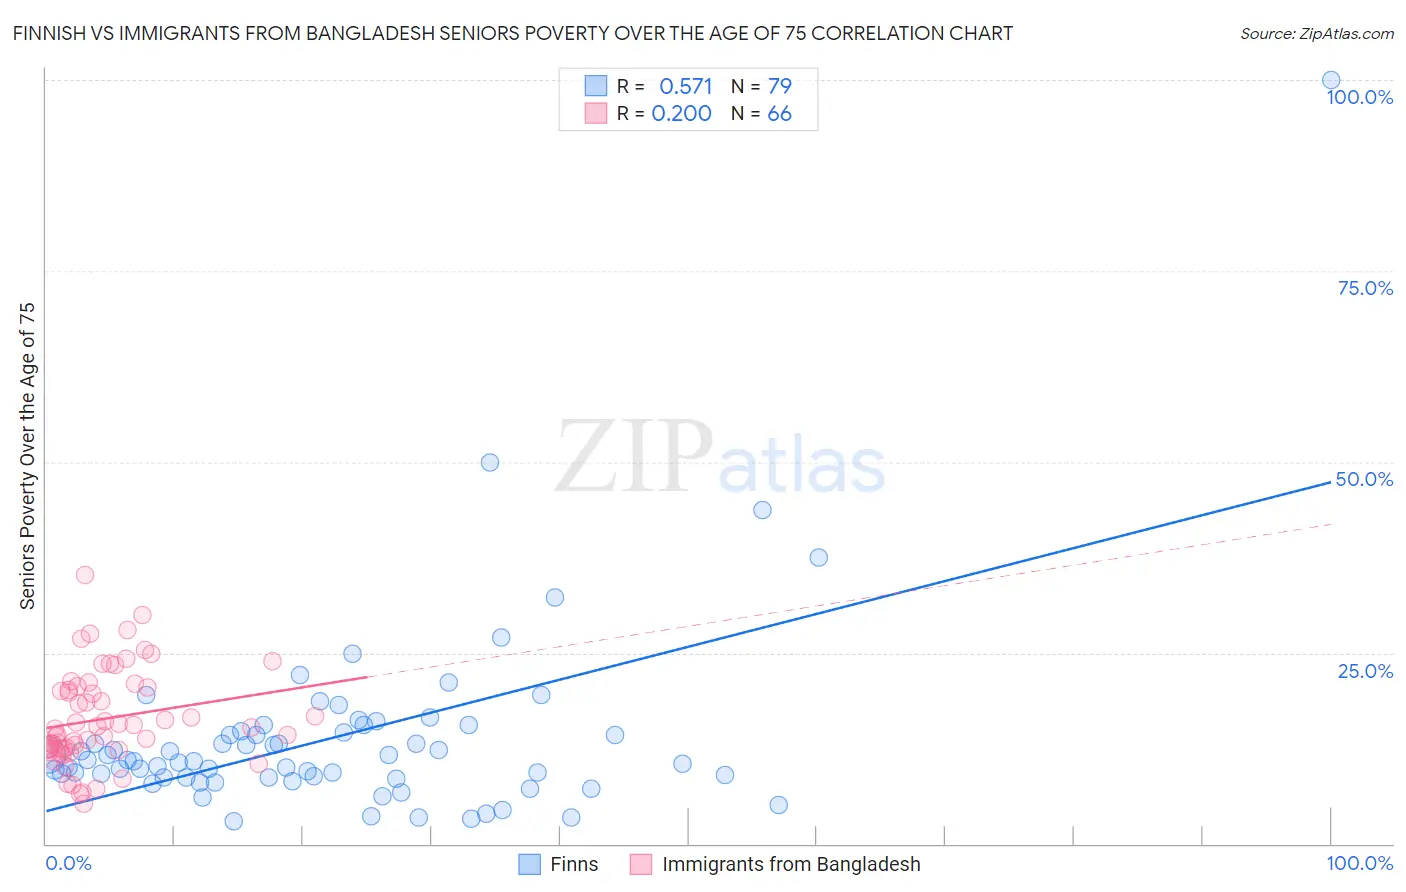 Finnish vs Immigrants from Bangladesh Seniors Poverty Over the Age of 75